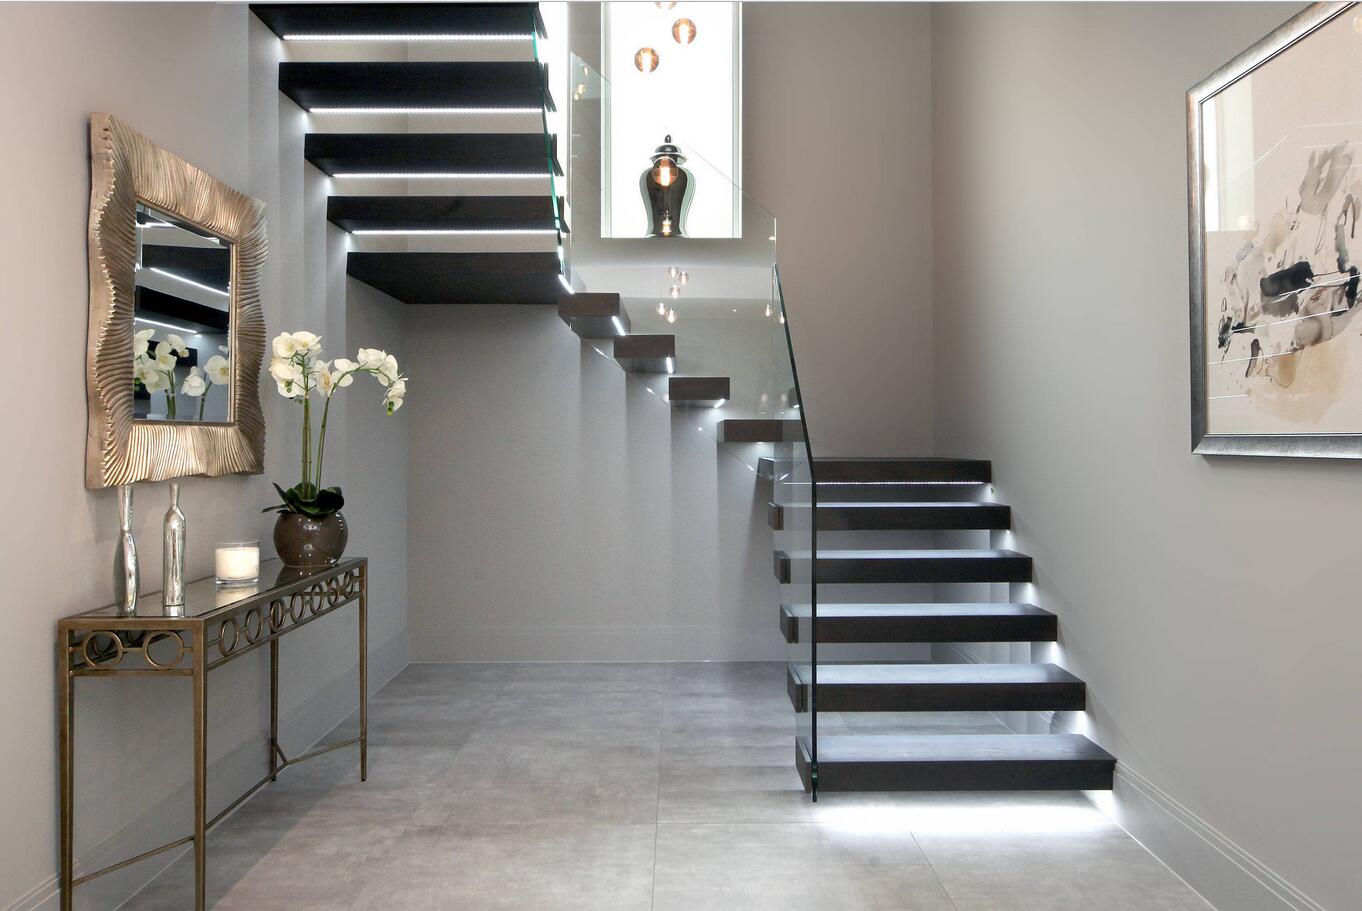 Floating staircase with Dark Wood Treads and led lights